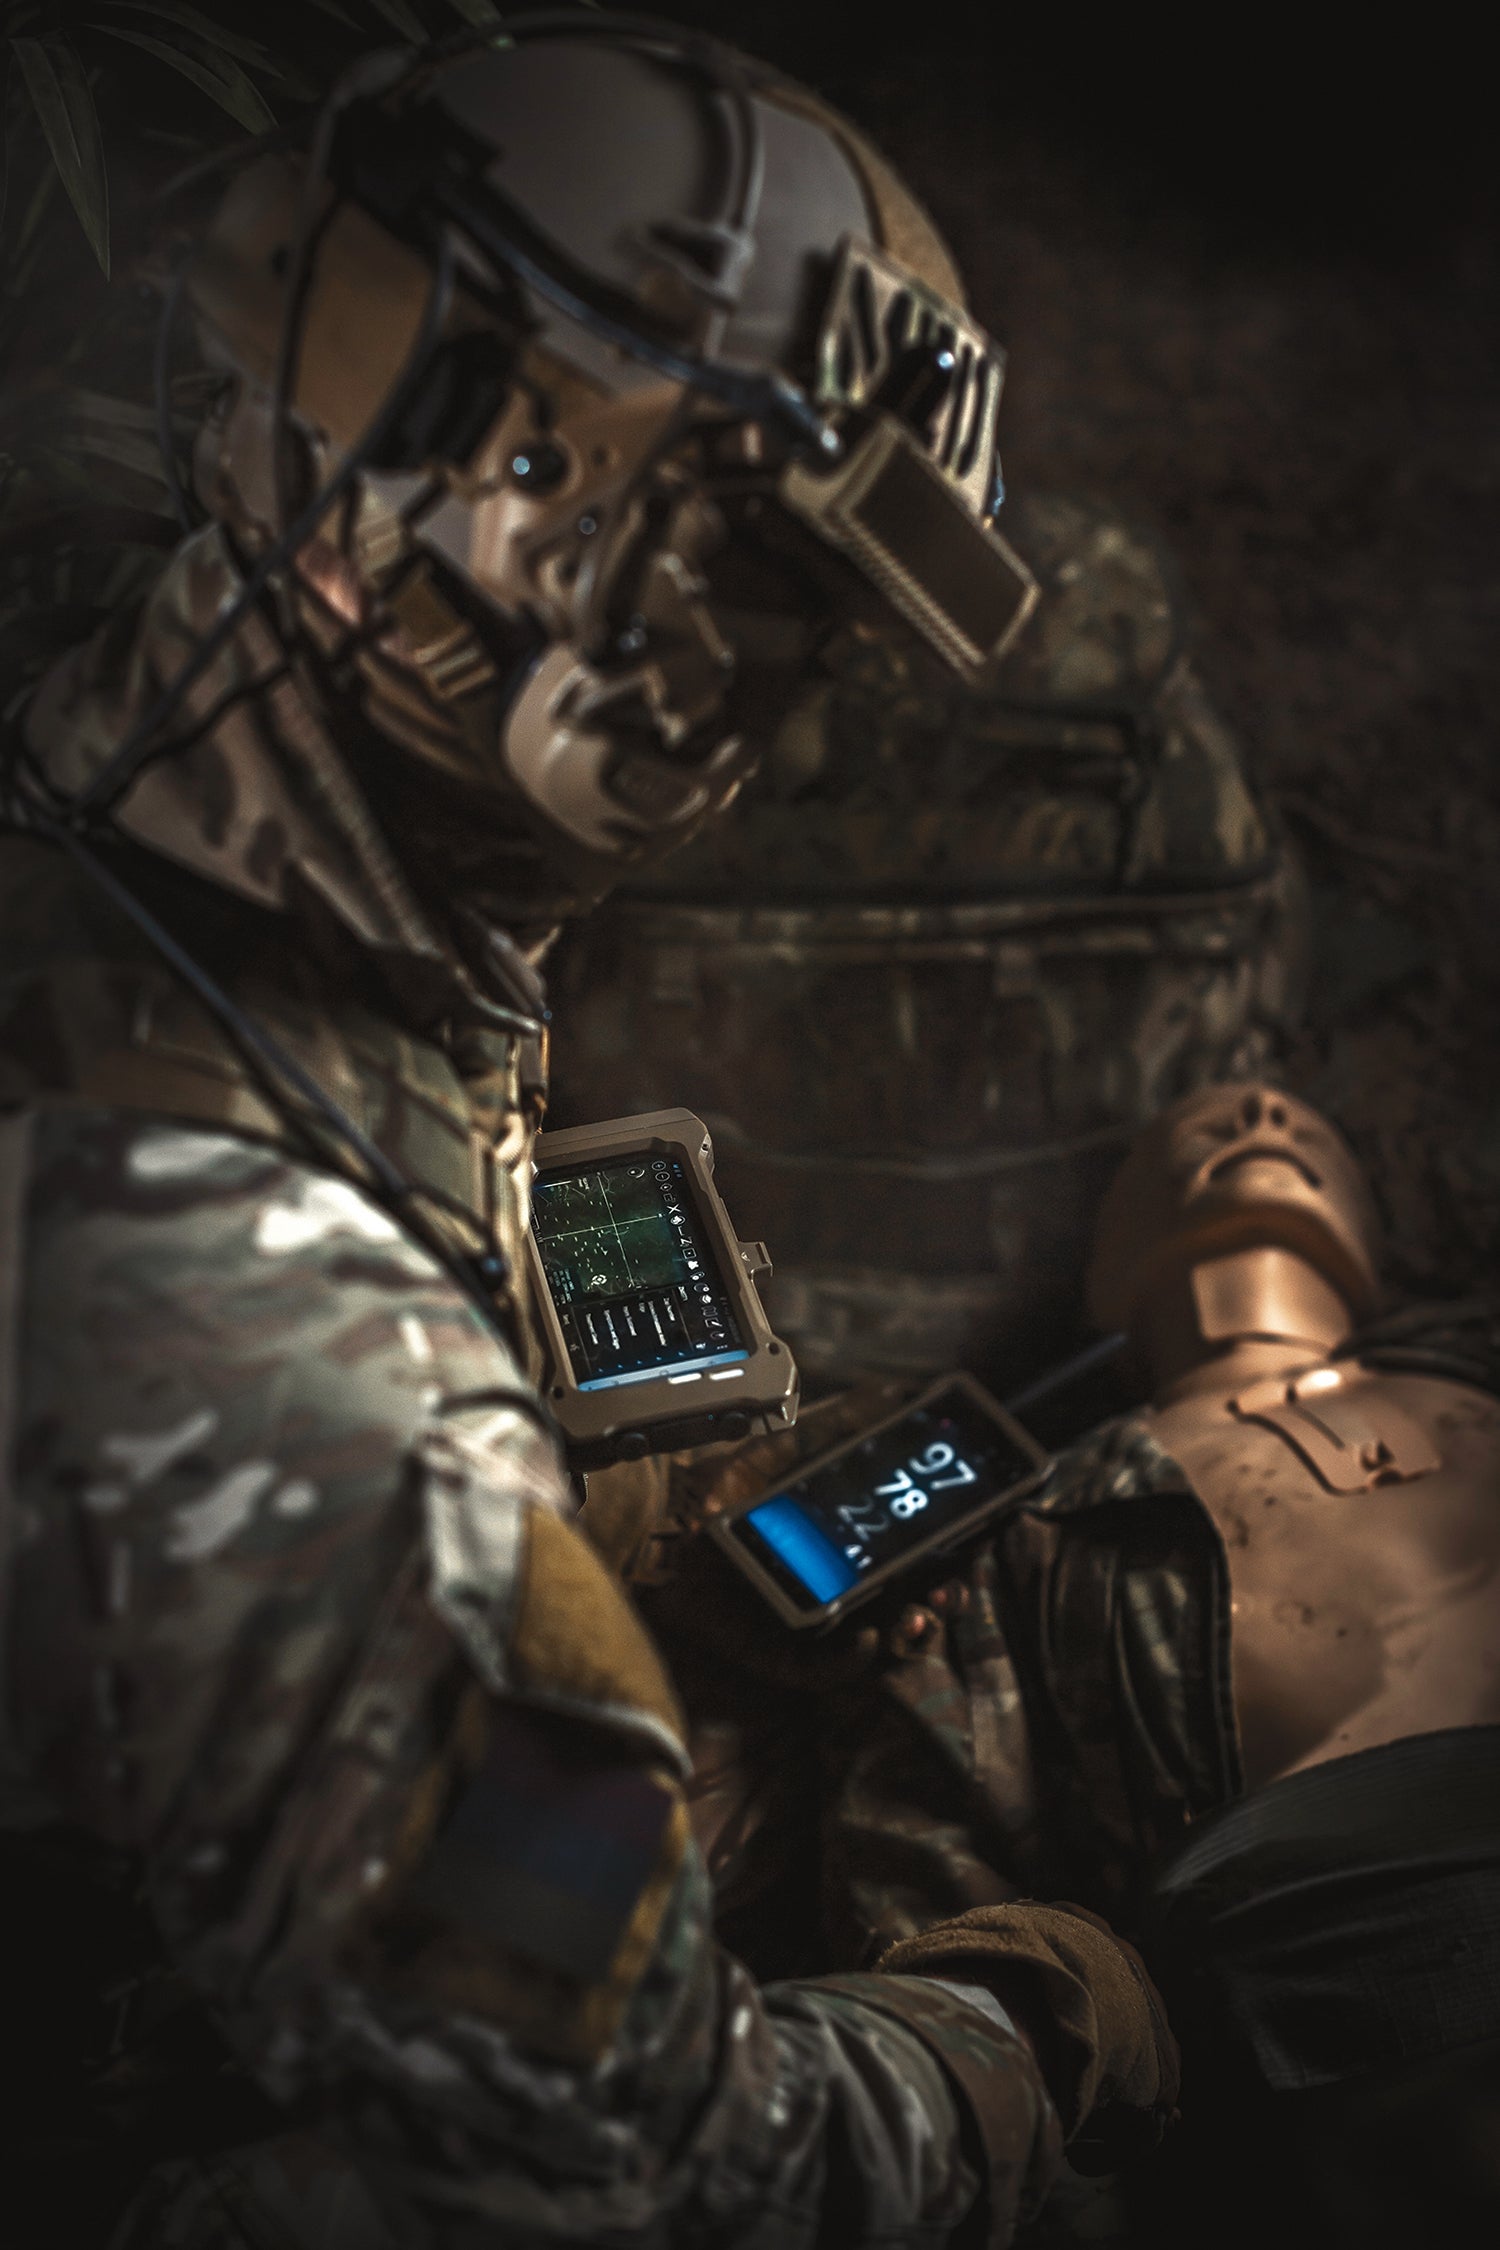 A medic with the British Army’s 16 Medical Regiment trains with satellite equipment